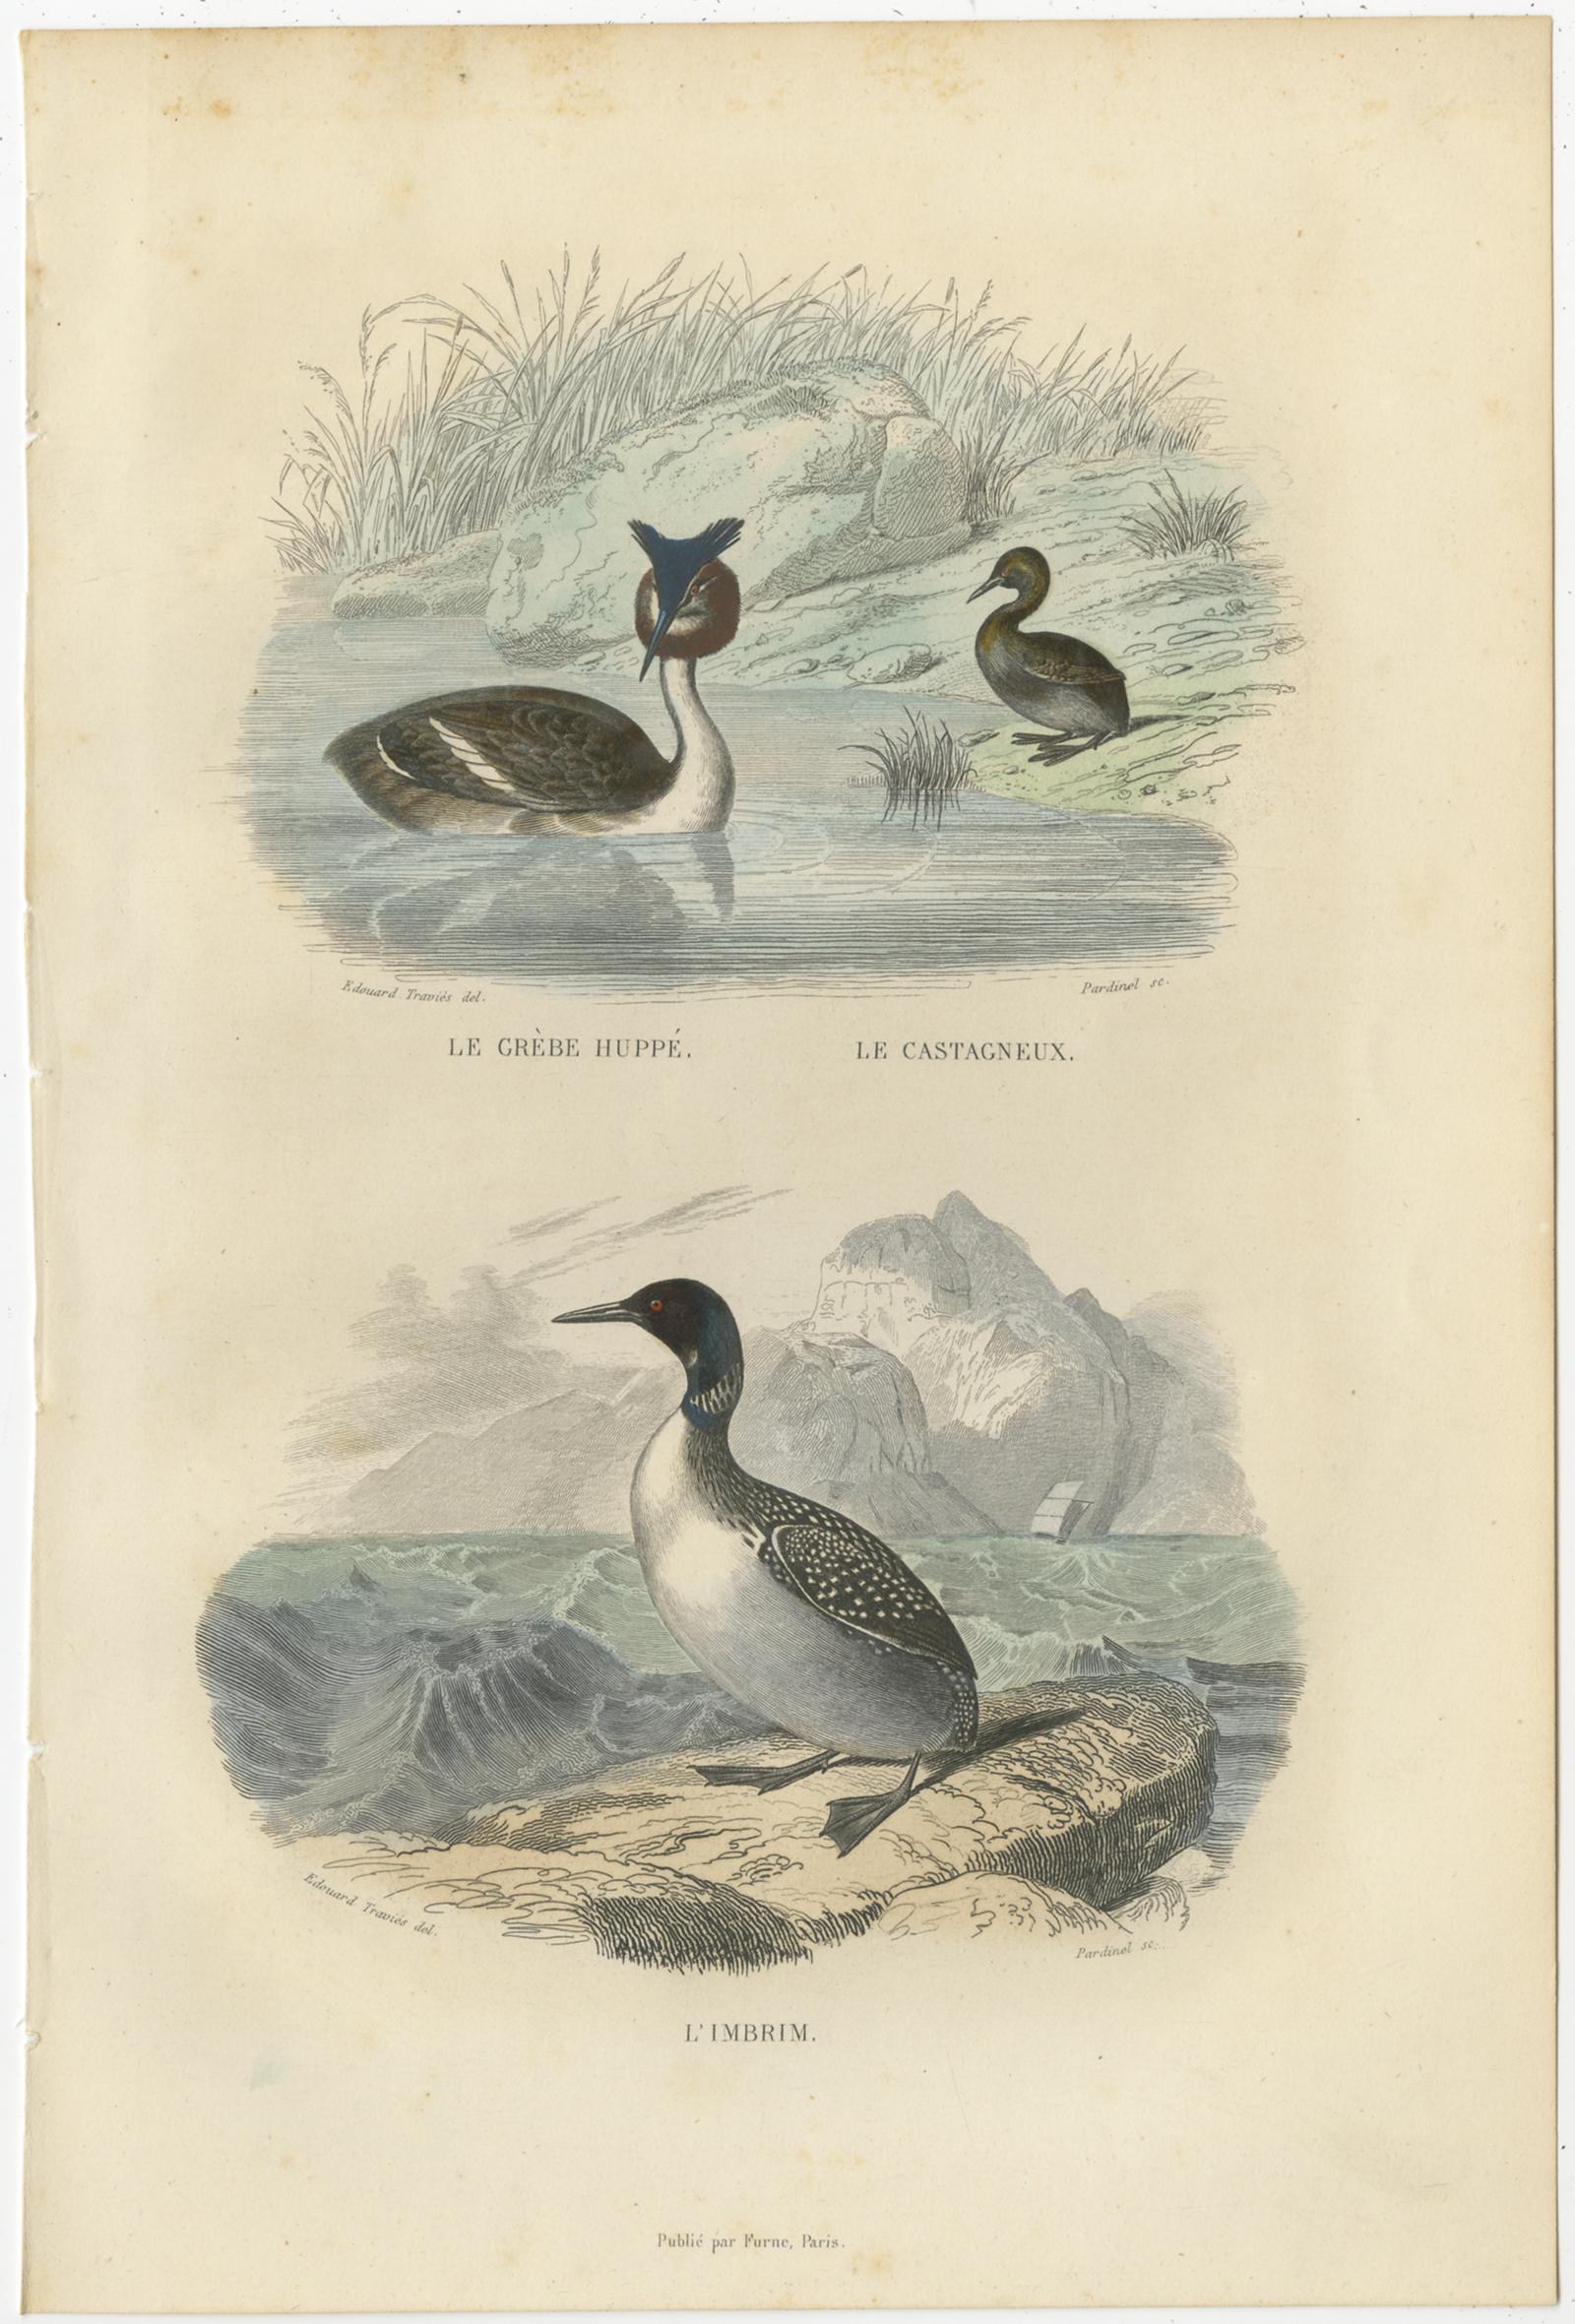 Set of three antique bird prints titled 'Le Pierre-Garin - La Frégate, Le Grèbe Huppé - L'Imbrim, Canard Femelle et ses Petits - l'Oie Sauvage'. It shows the Tern, Frigatebird, the Great Crested Grebe and other water birds. These prints originate